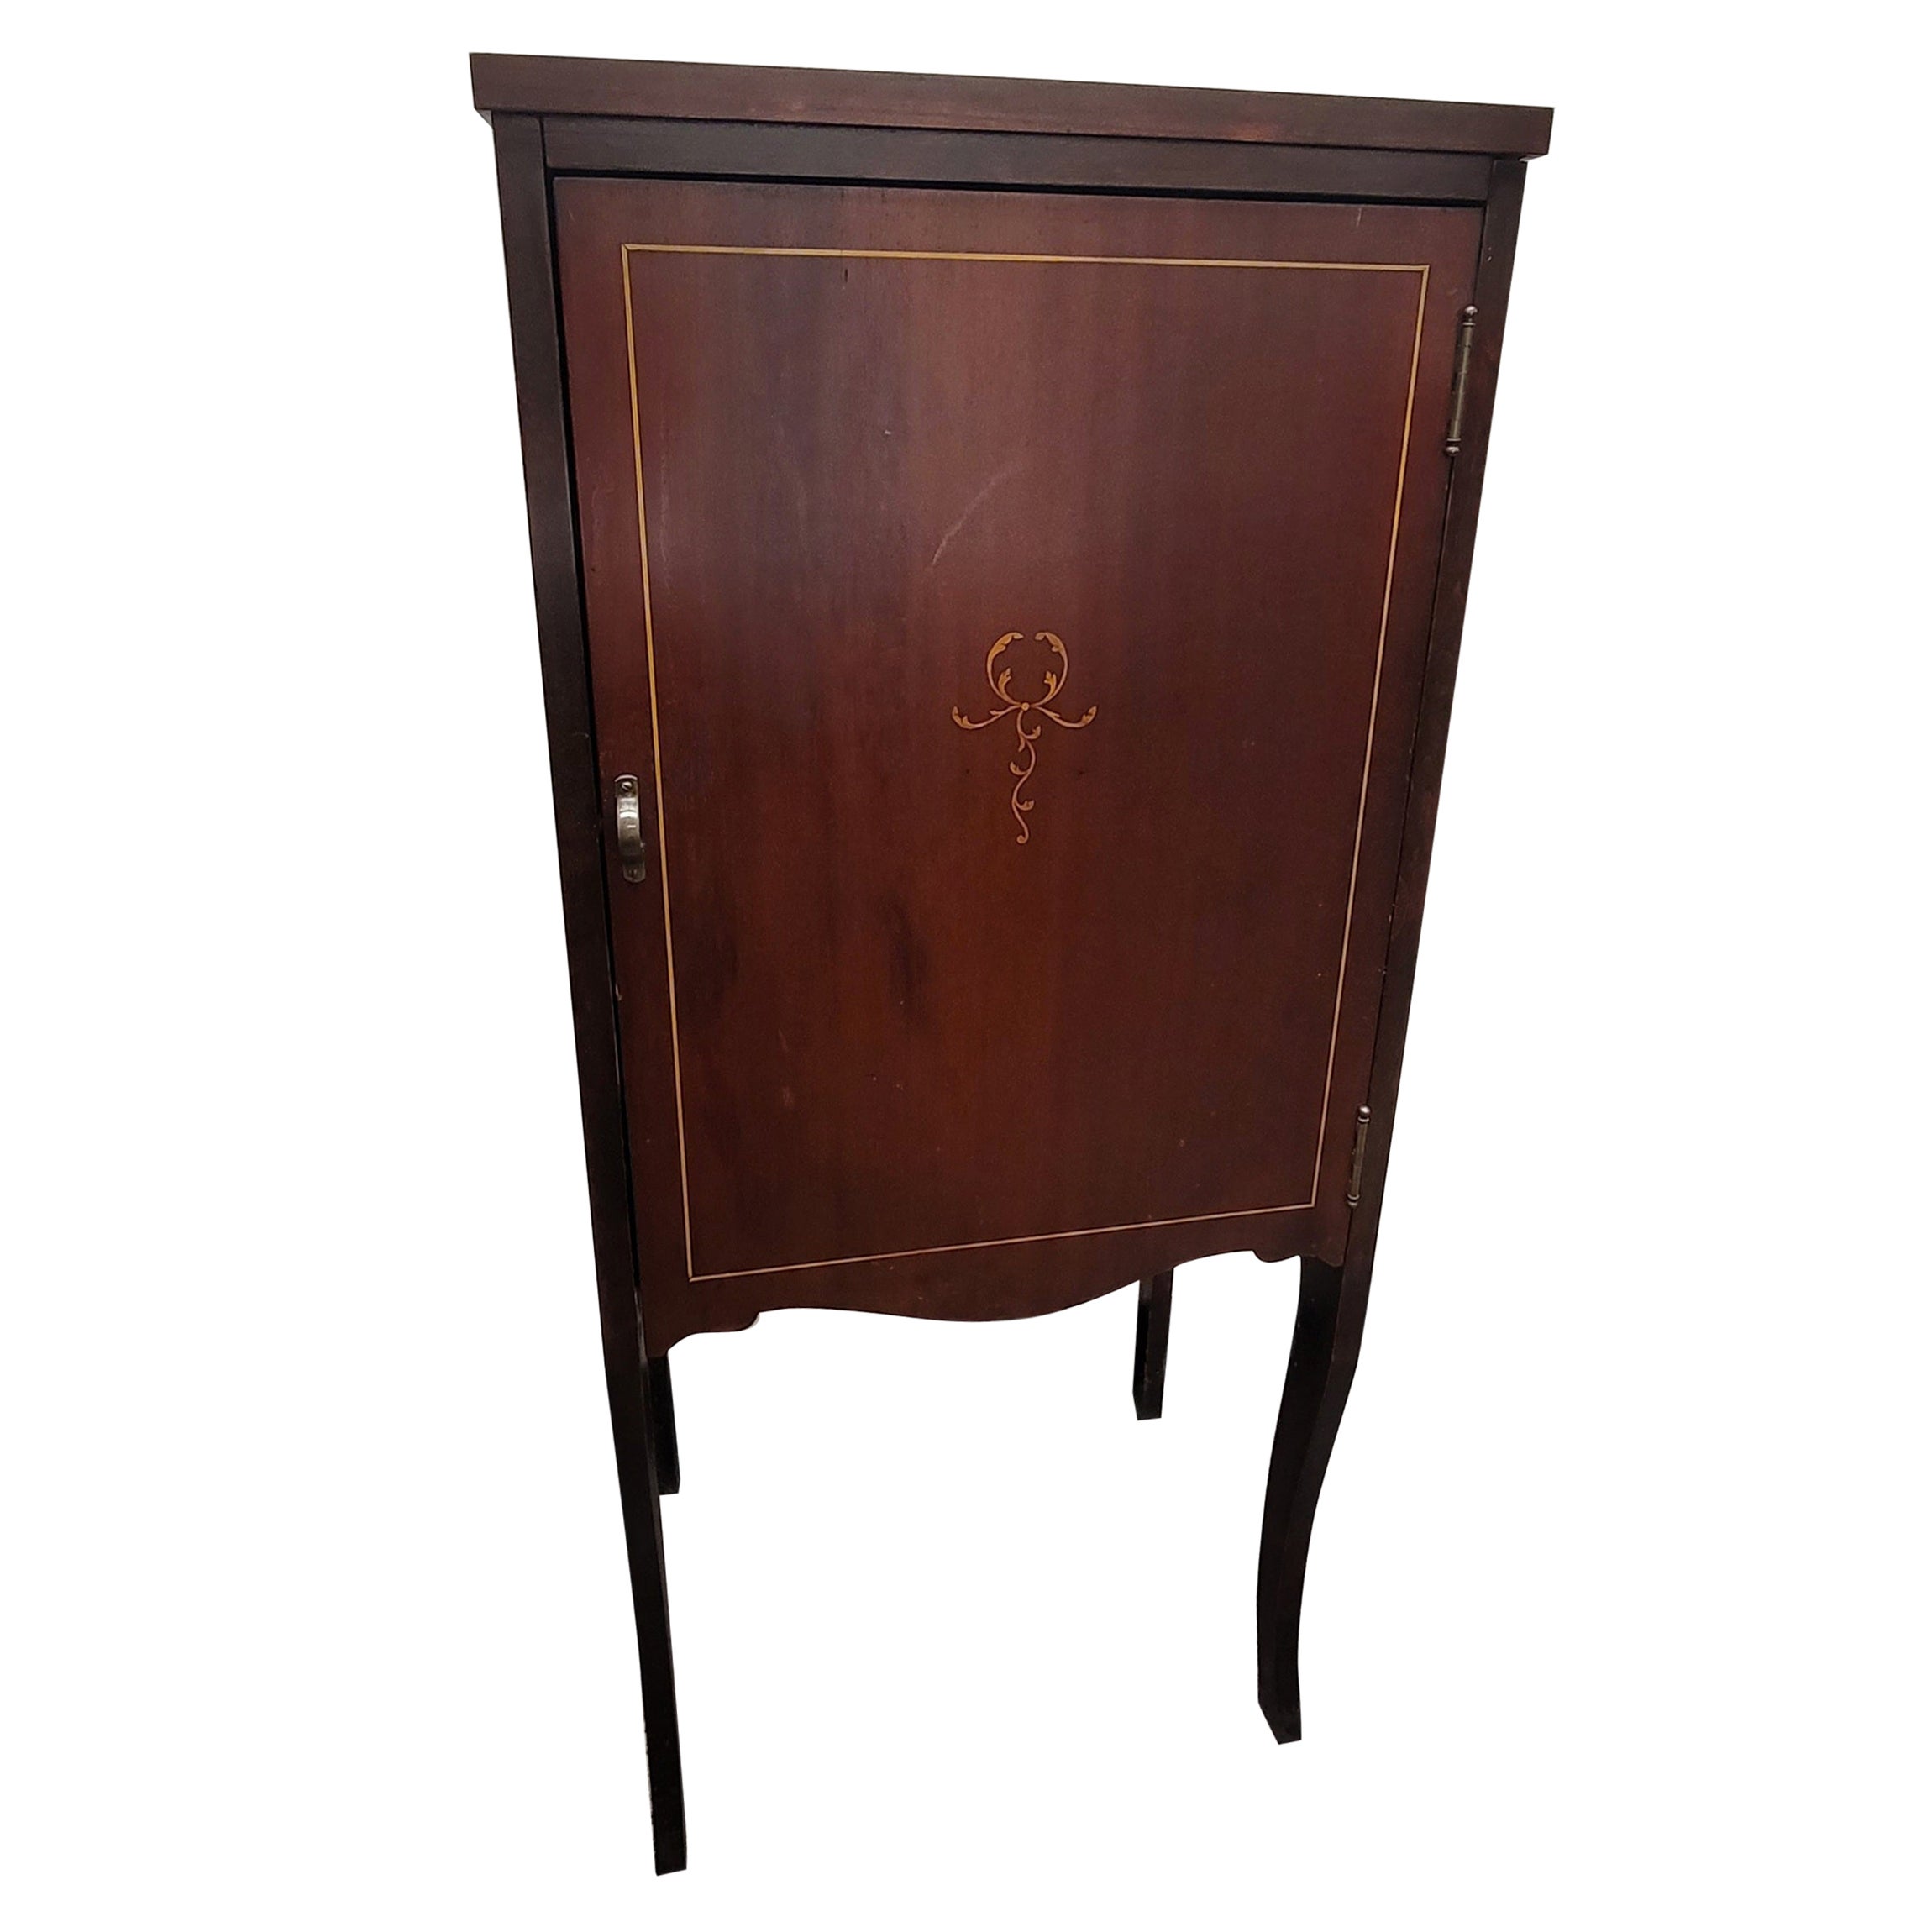 Early 20th C. Edwardian Mahogany Marquetry Satinwood Inlaid Sheet Music Cabinet For Sale